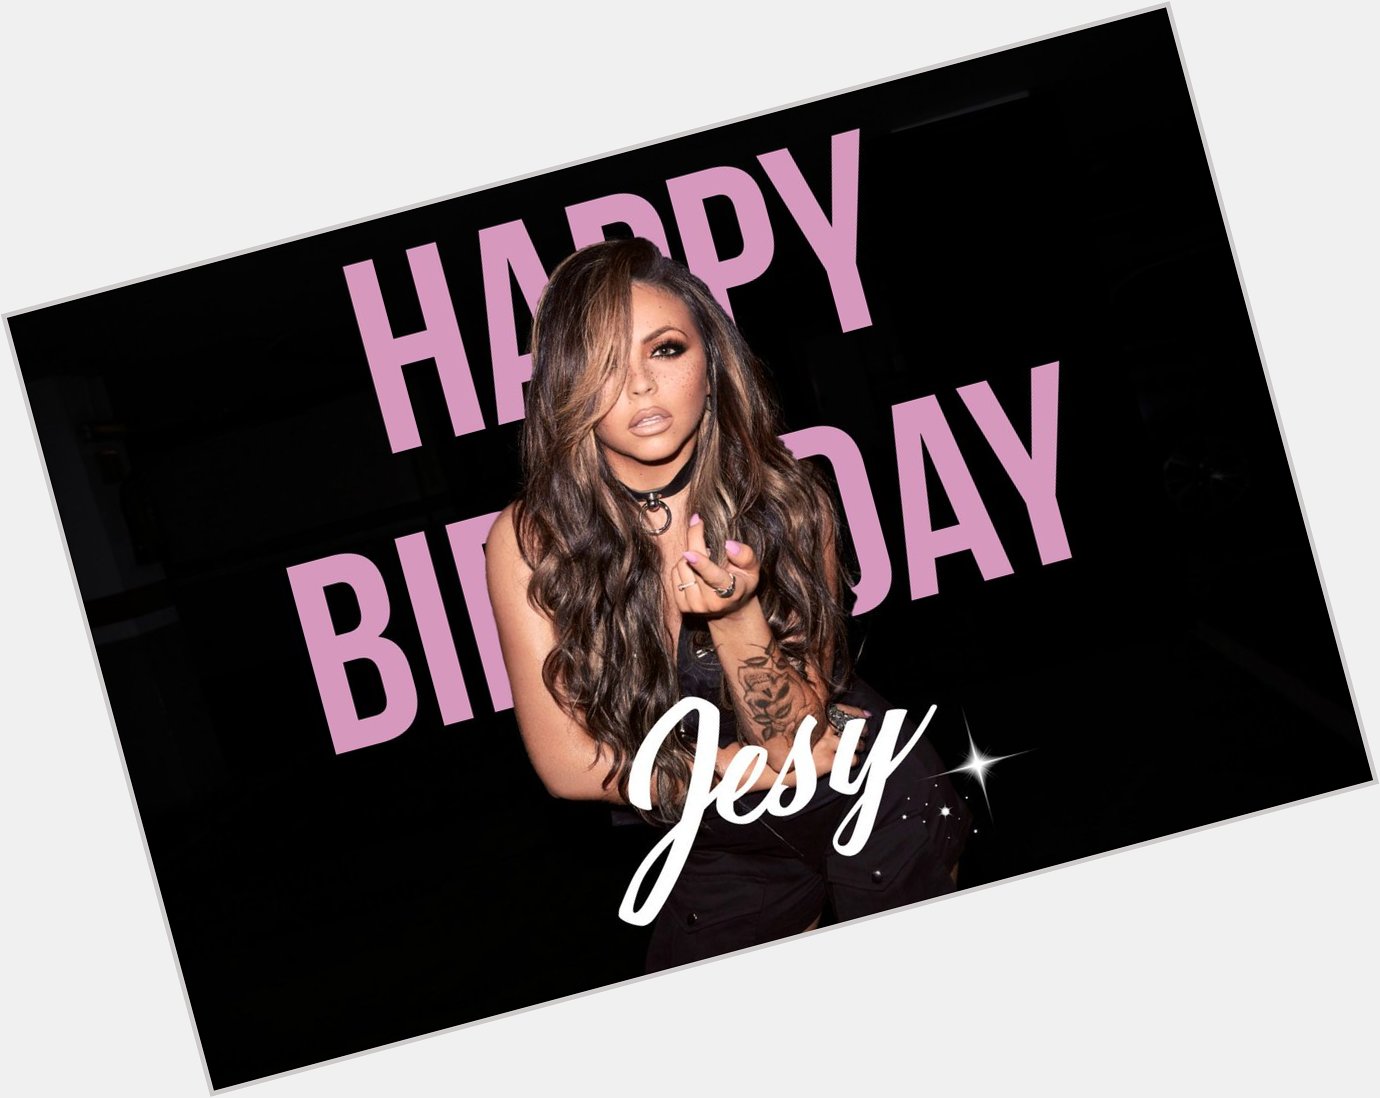 Happy Birthday Jesy Nelson Stay Gorgeous, Talented, Kind and Inspiring. Love you lots     